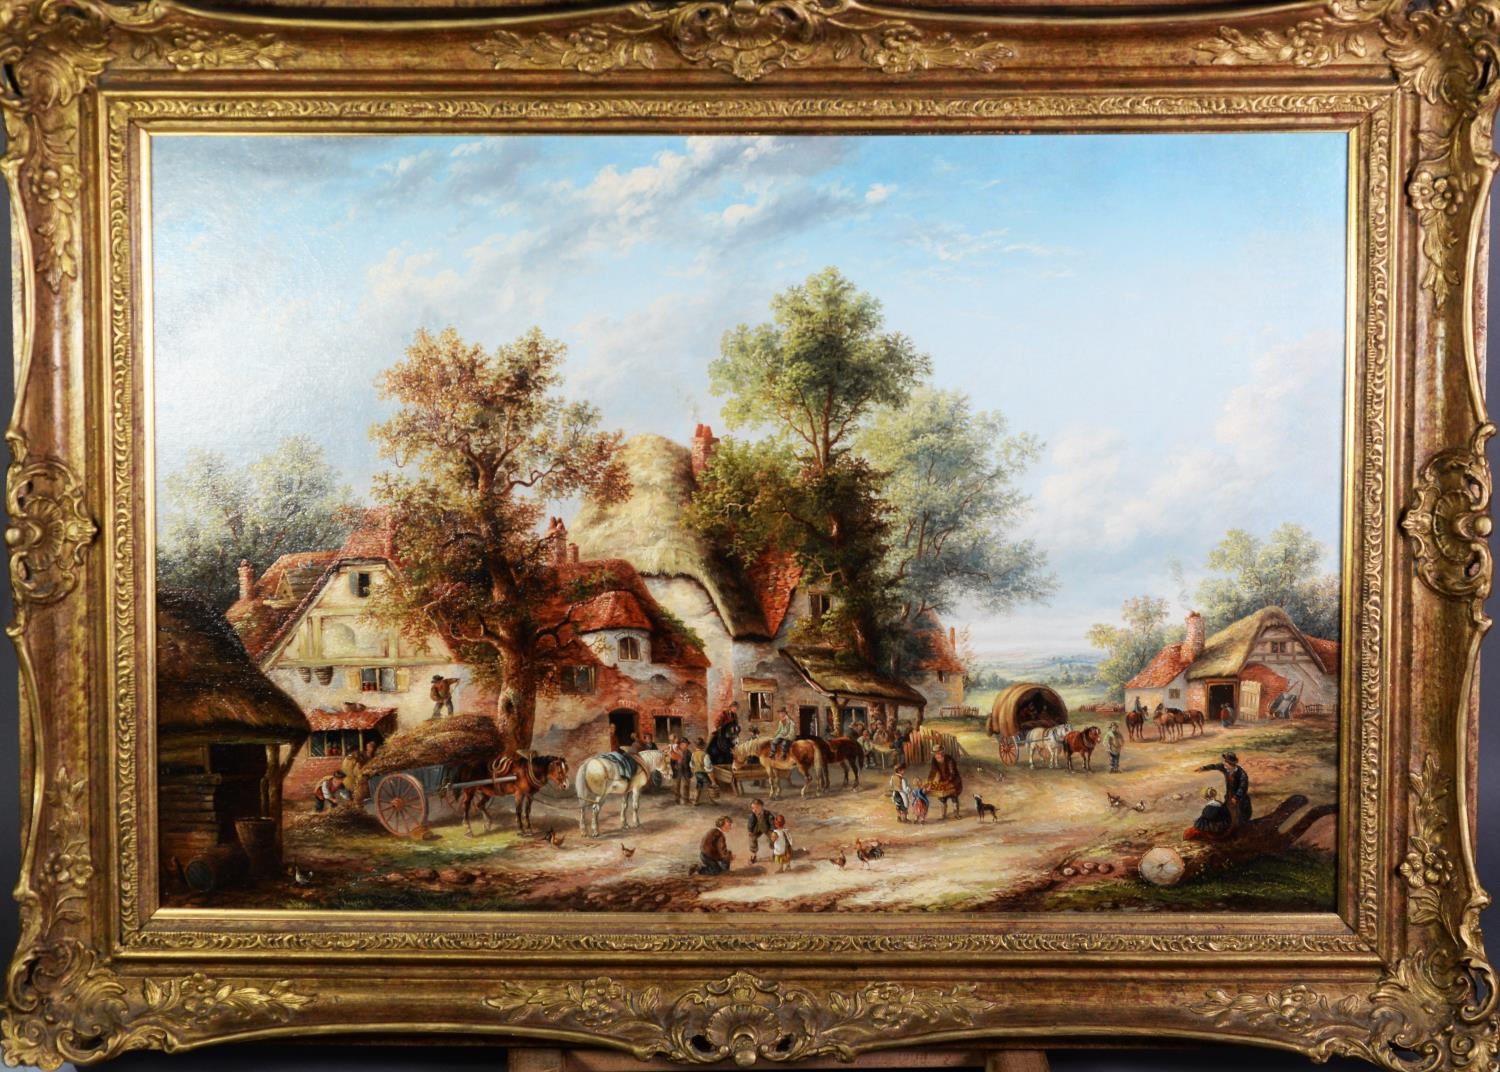 ATTRIBUTED TO EDWARD MASTERS (ACT. 1860-1880) OIL ON CANVAS c.1860 'A Busy Village Scene' c.1860, - Image 2 of 2